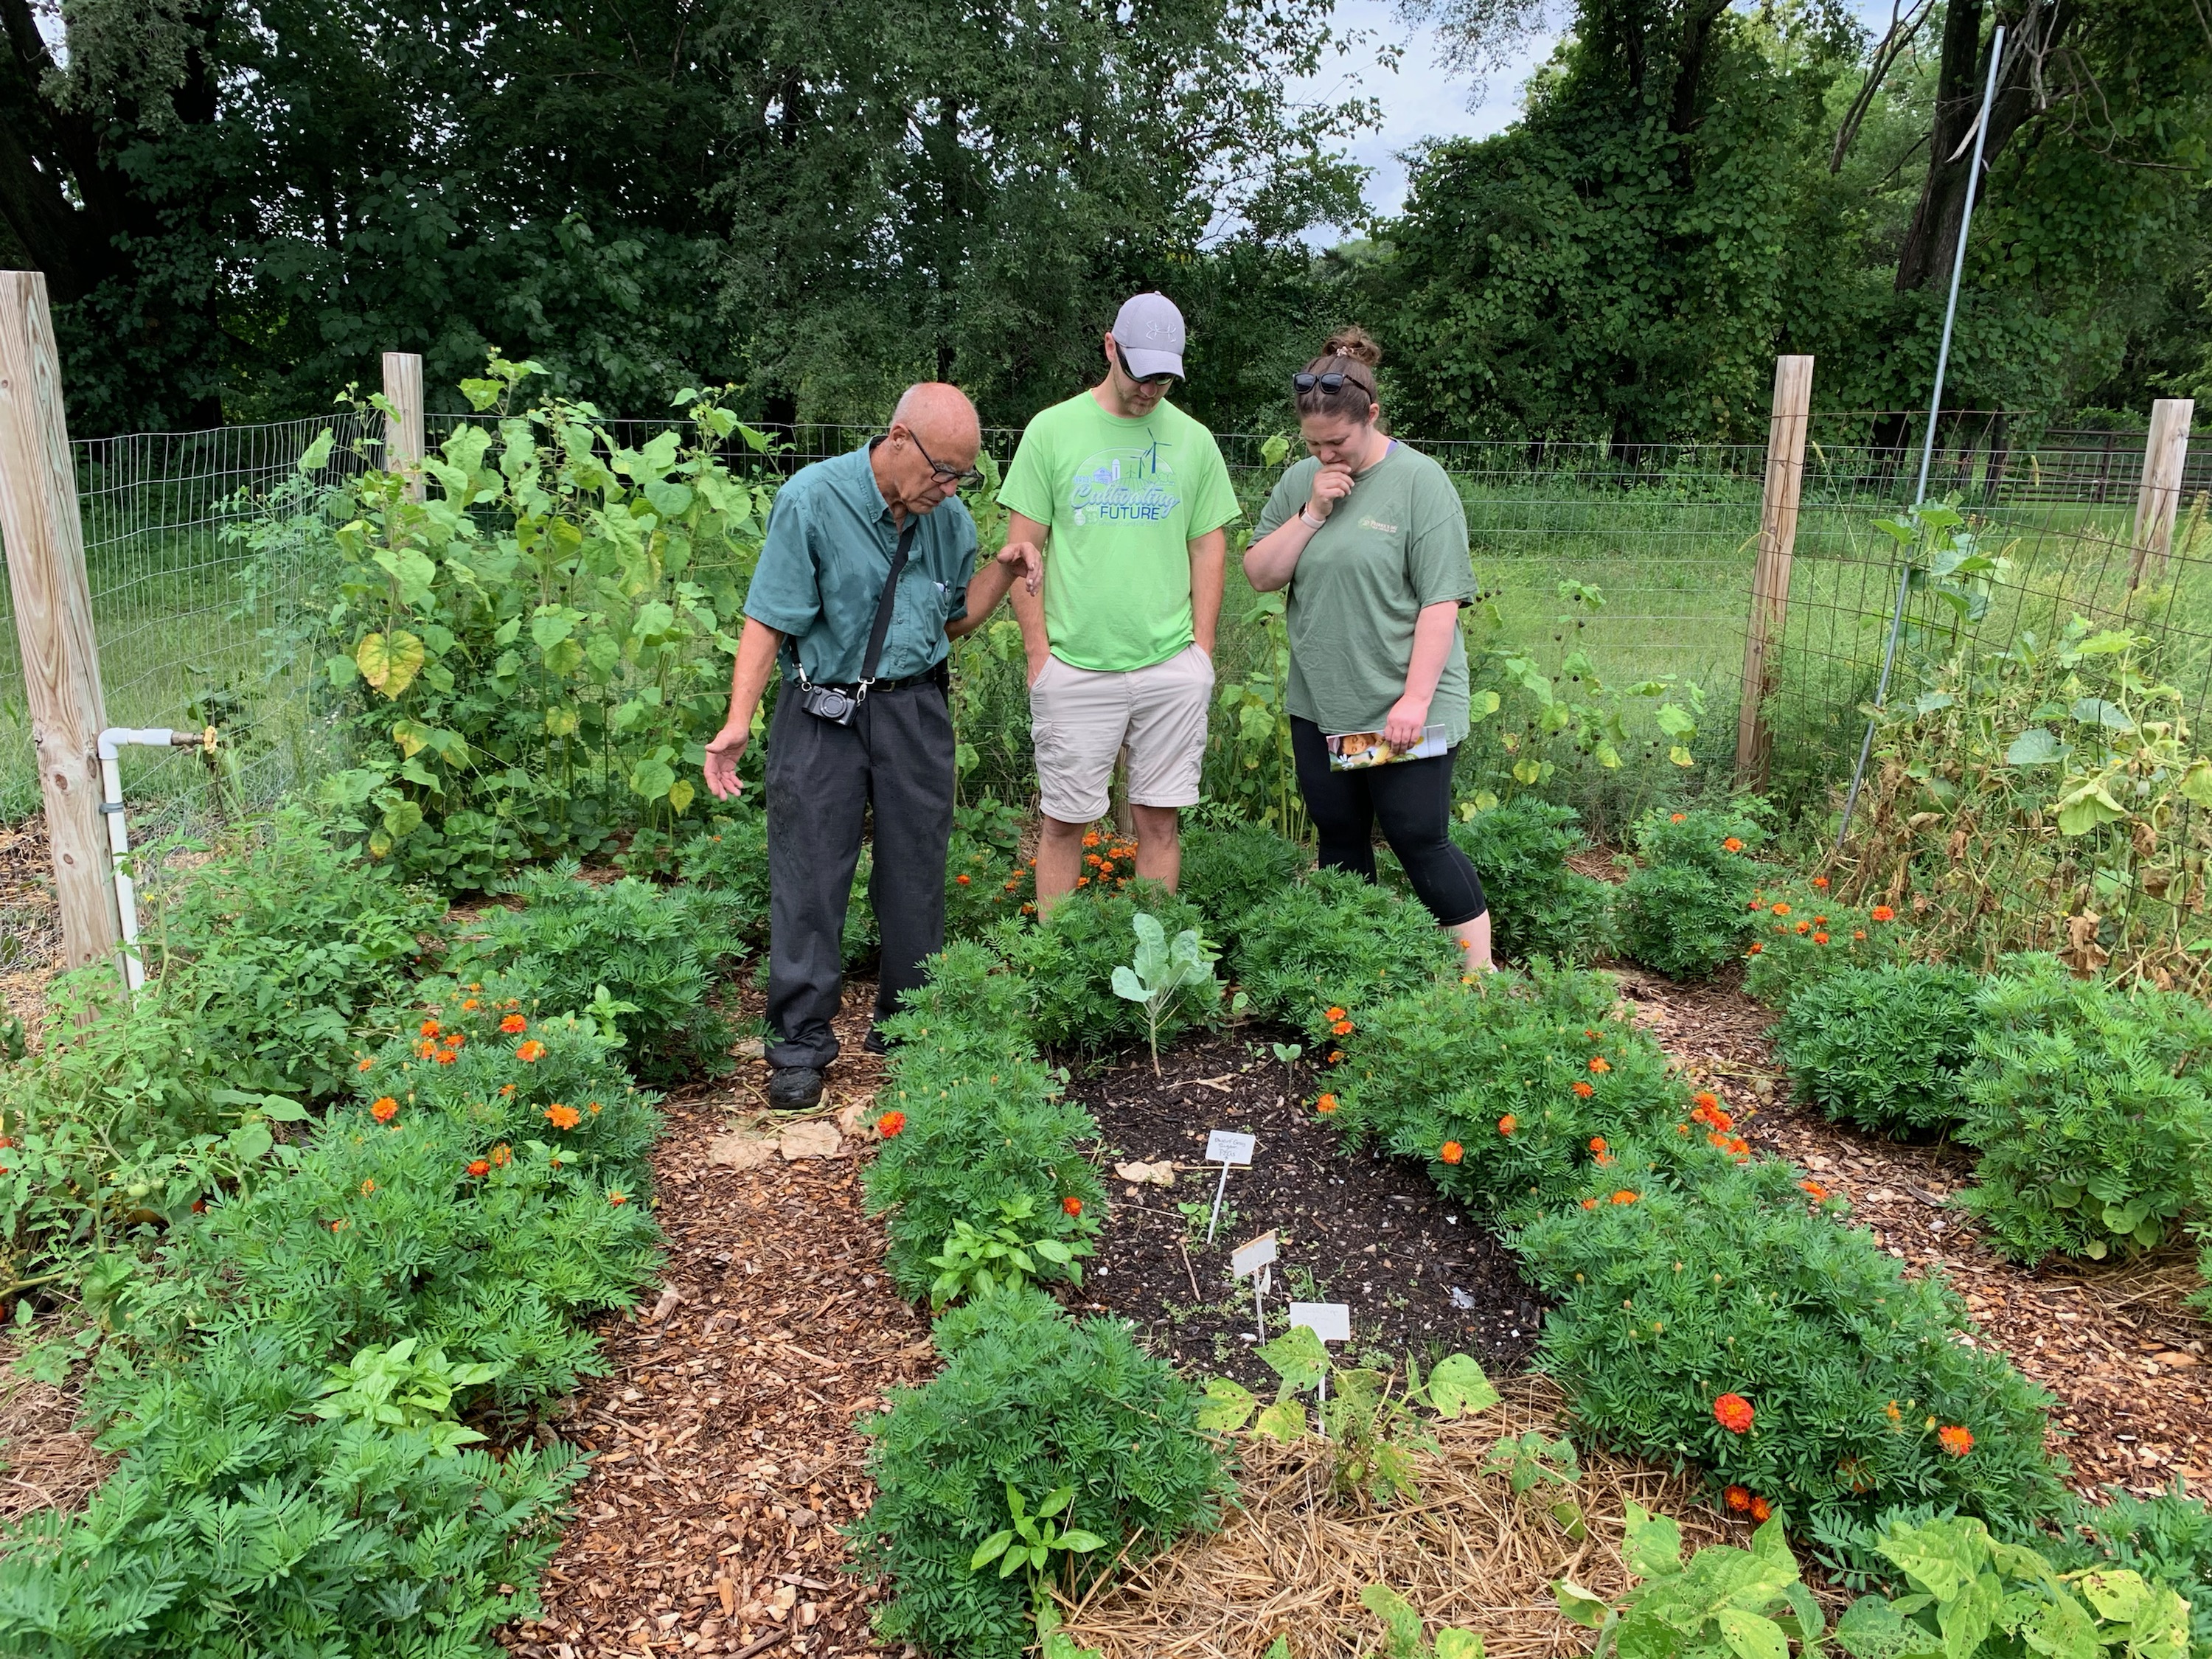 Community members standing in a garden during the 2022 Farm Crawl